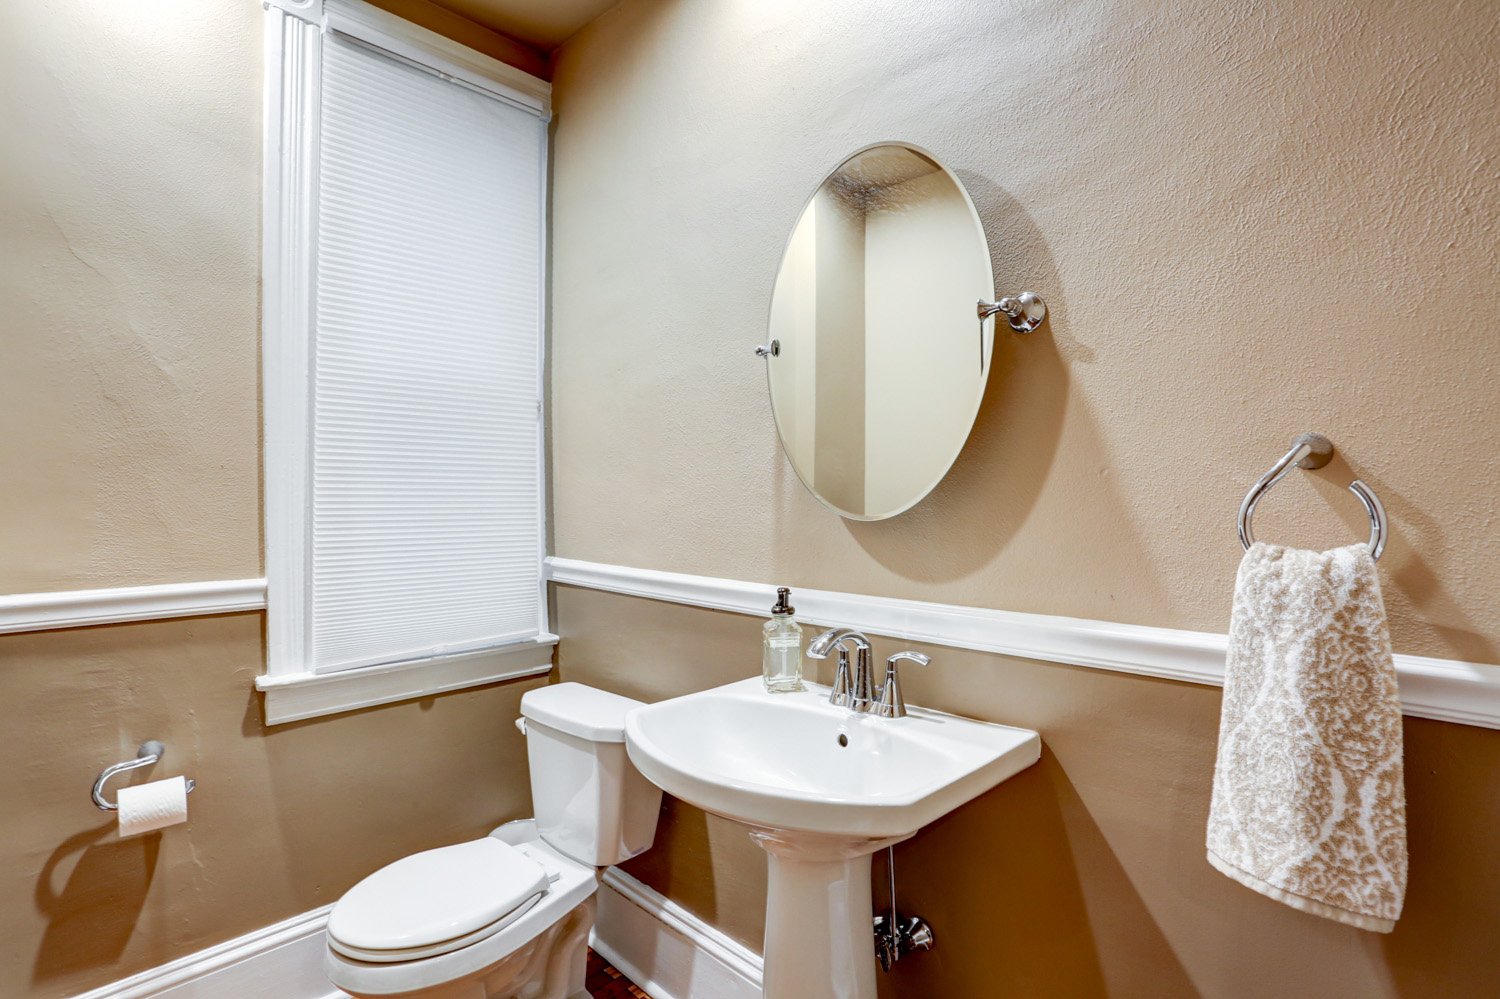 Lancaster Half Bathroom Remodel with pedestal sink and oval mirrot